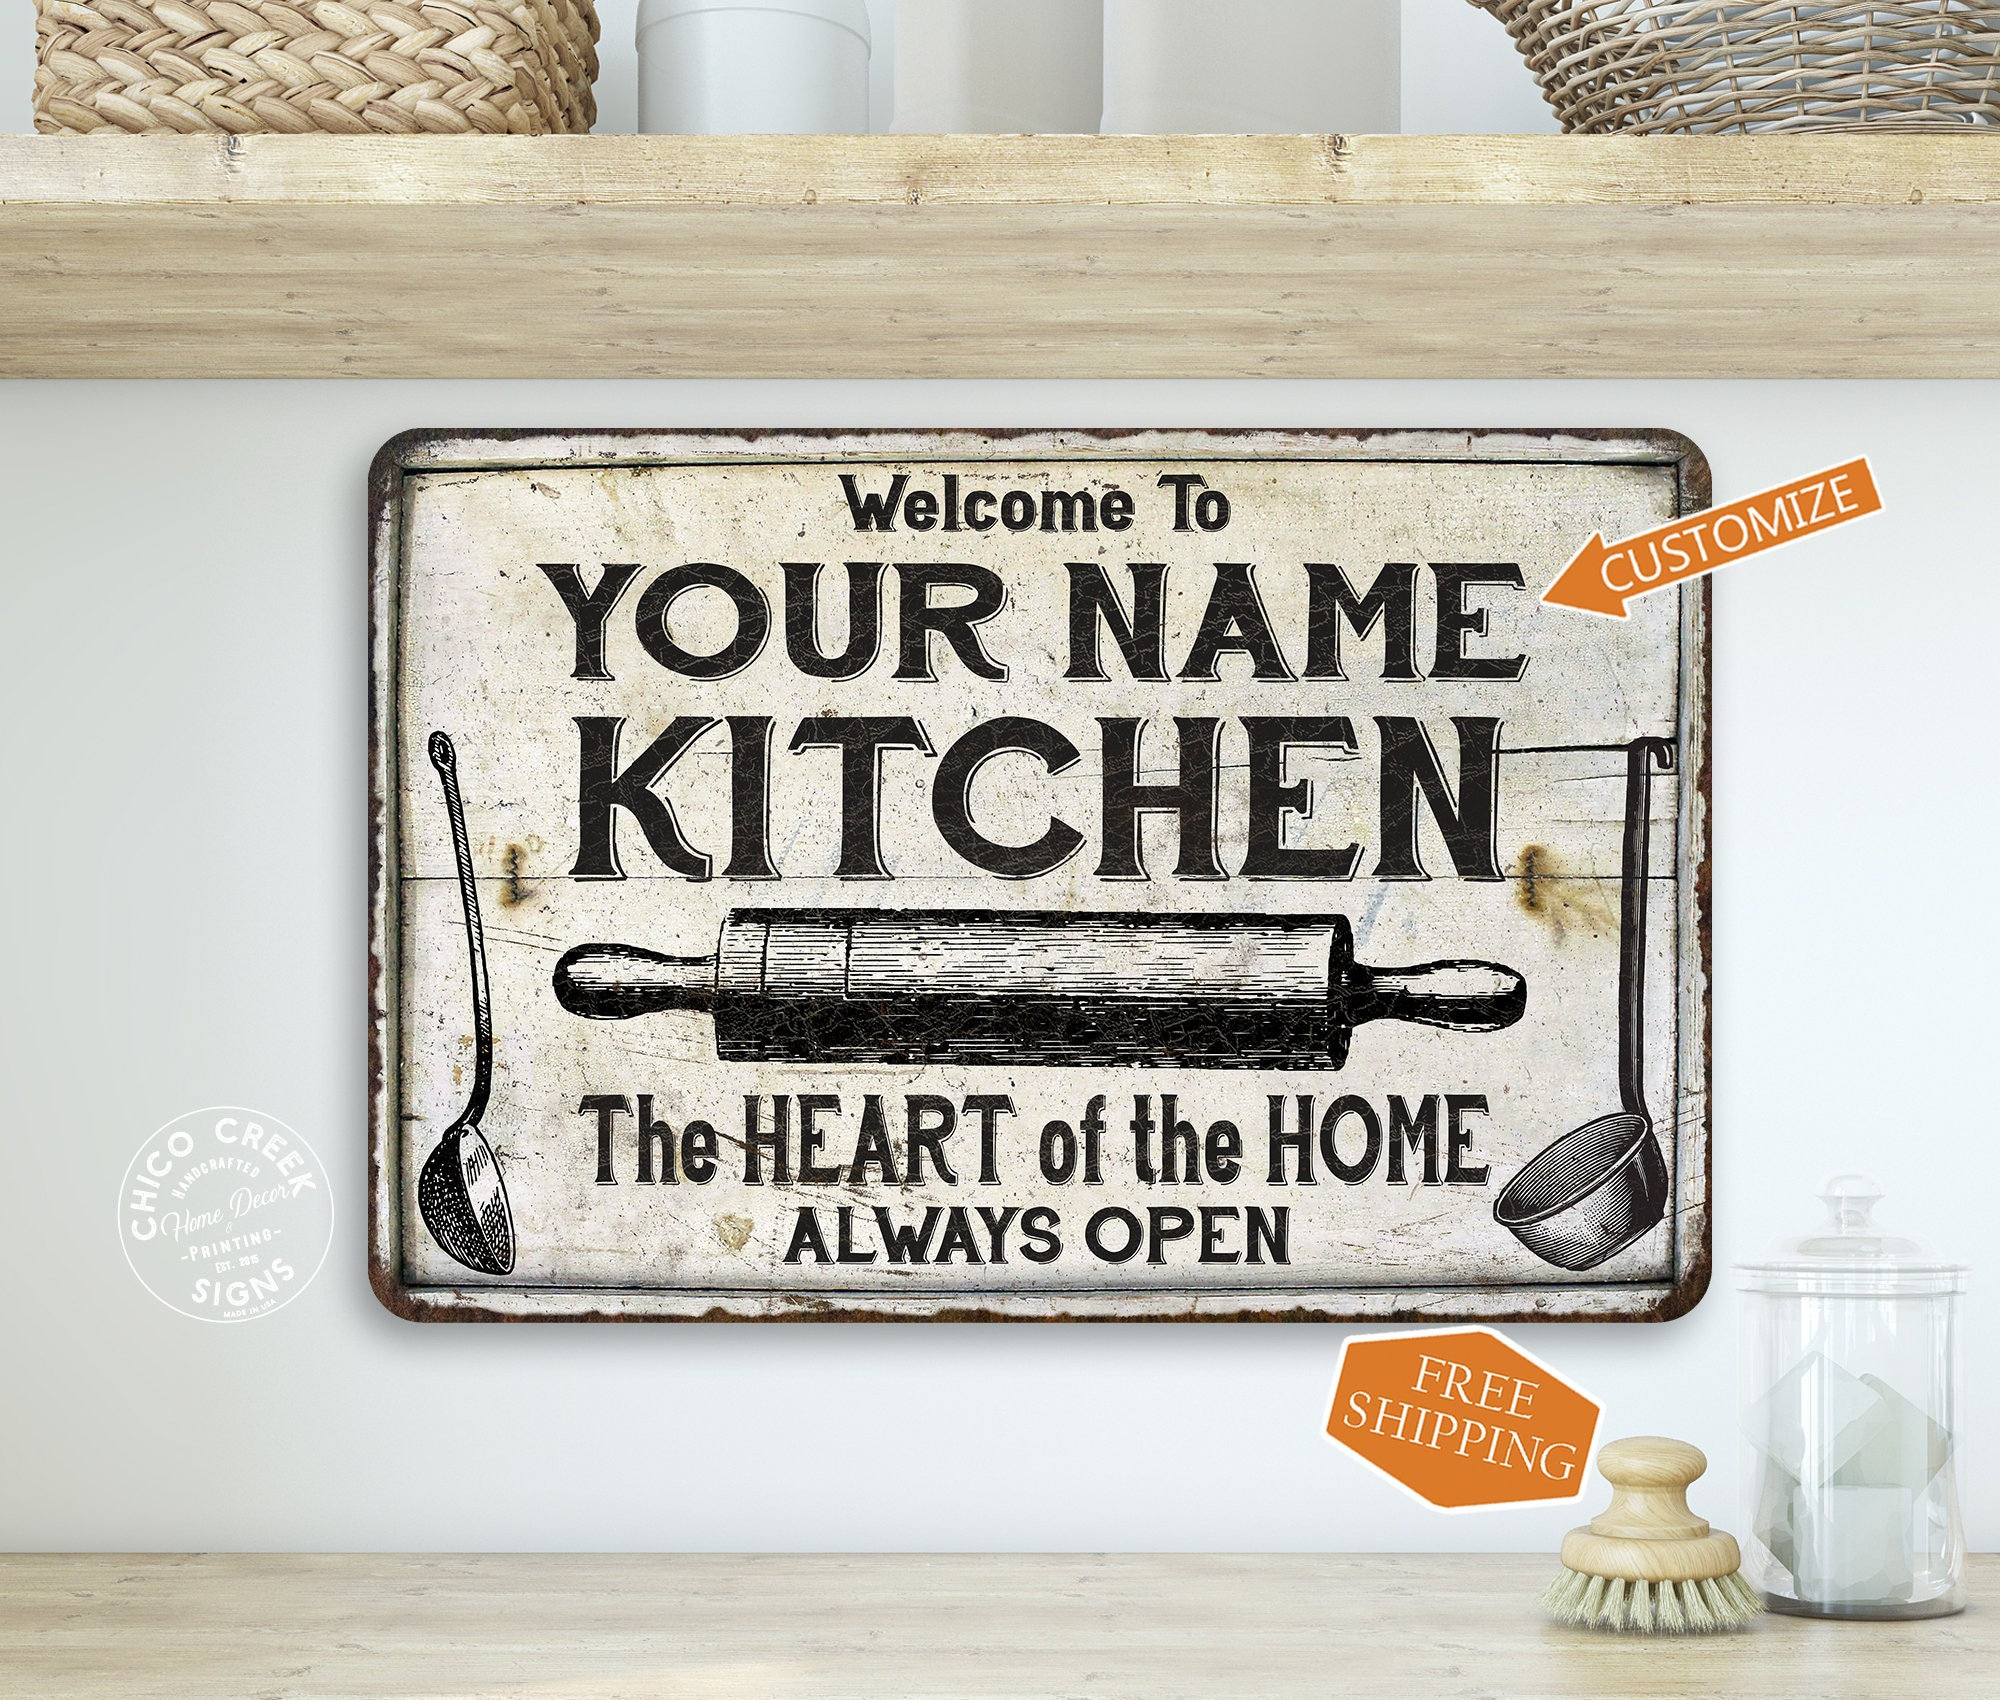 CHANEL's Kitchen Rustic Chic Decor Gift 6x18 Sign 106180051594